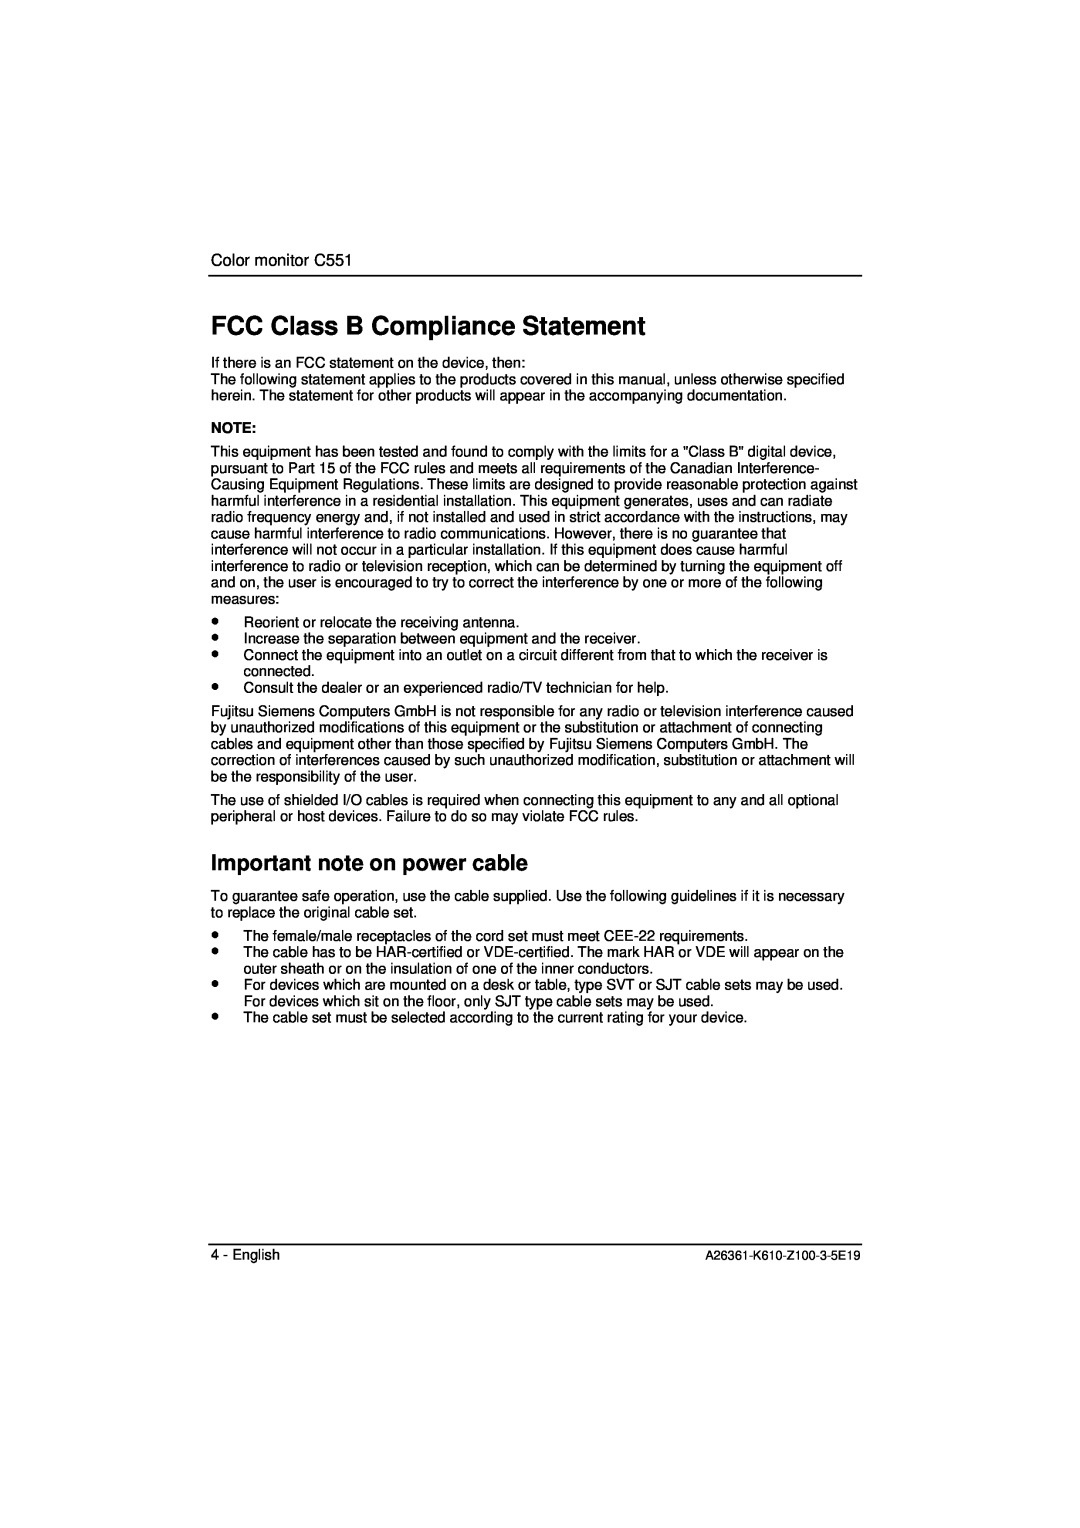 Fujitsu Siemens Computers manual FCC Class B Compliance Statement, Important note on power cable, Color monitor C551 